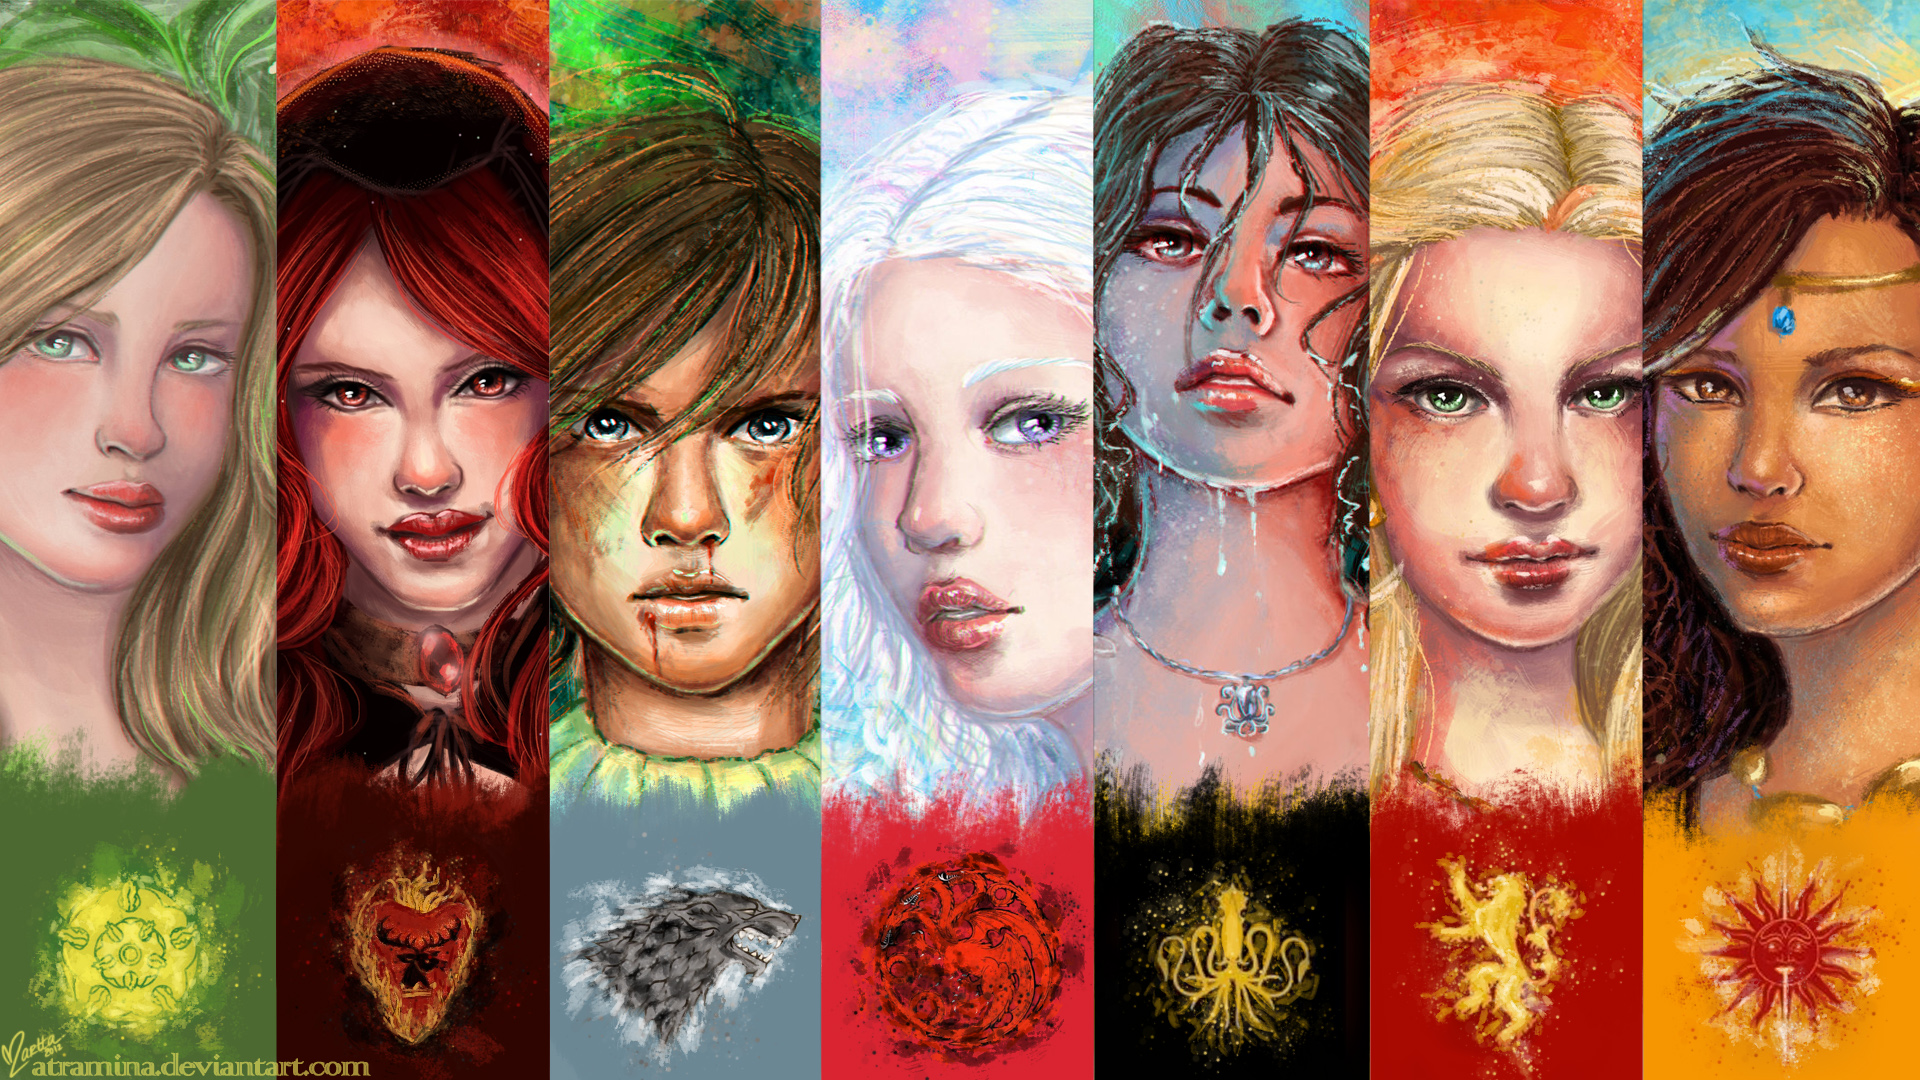 A Song Of Ice And Fire HD Wallpaper by Atramina